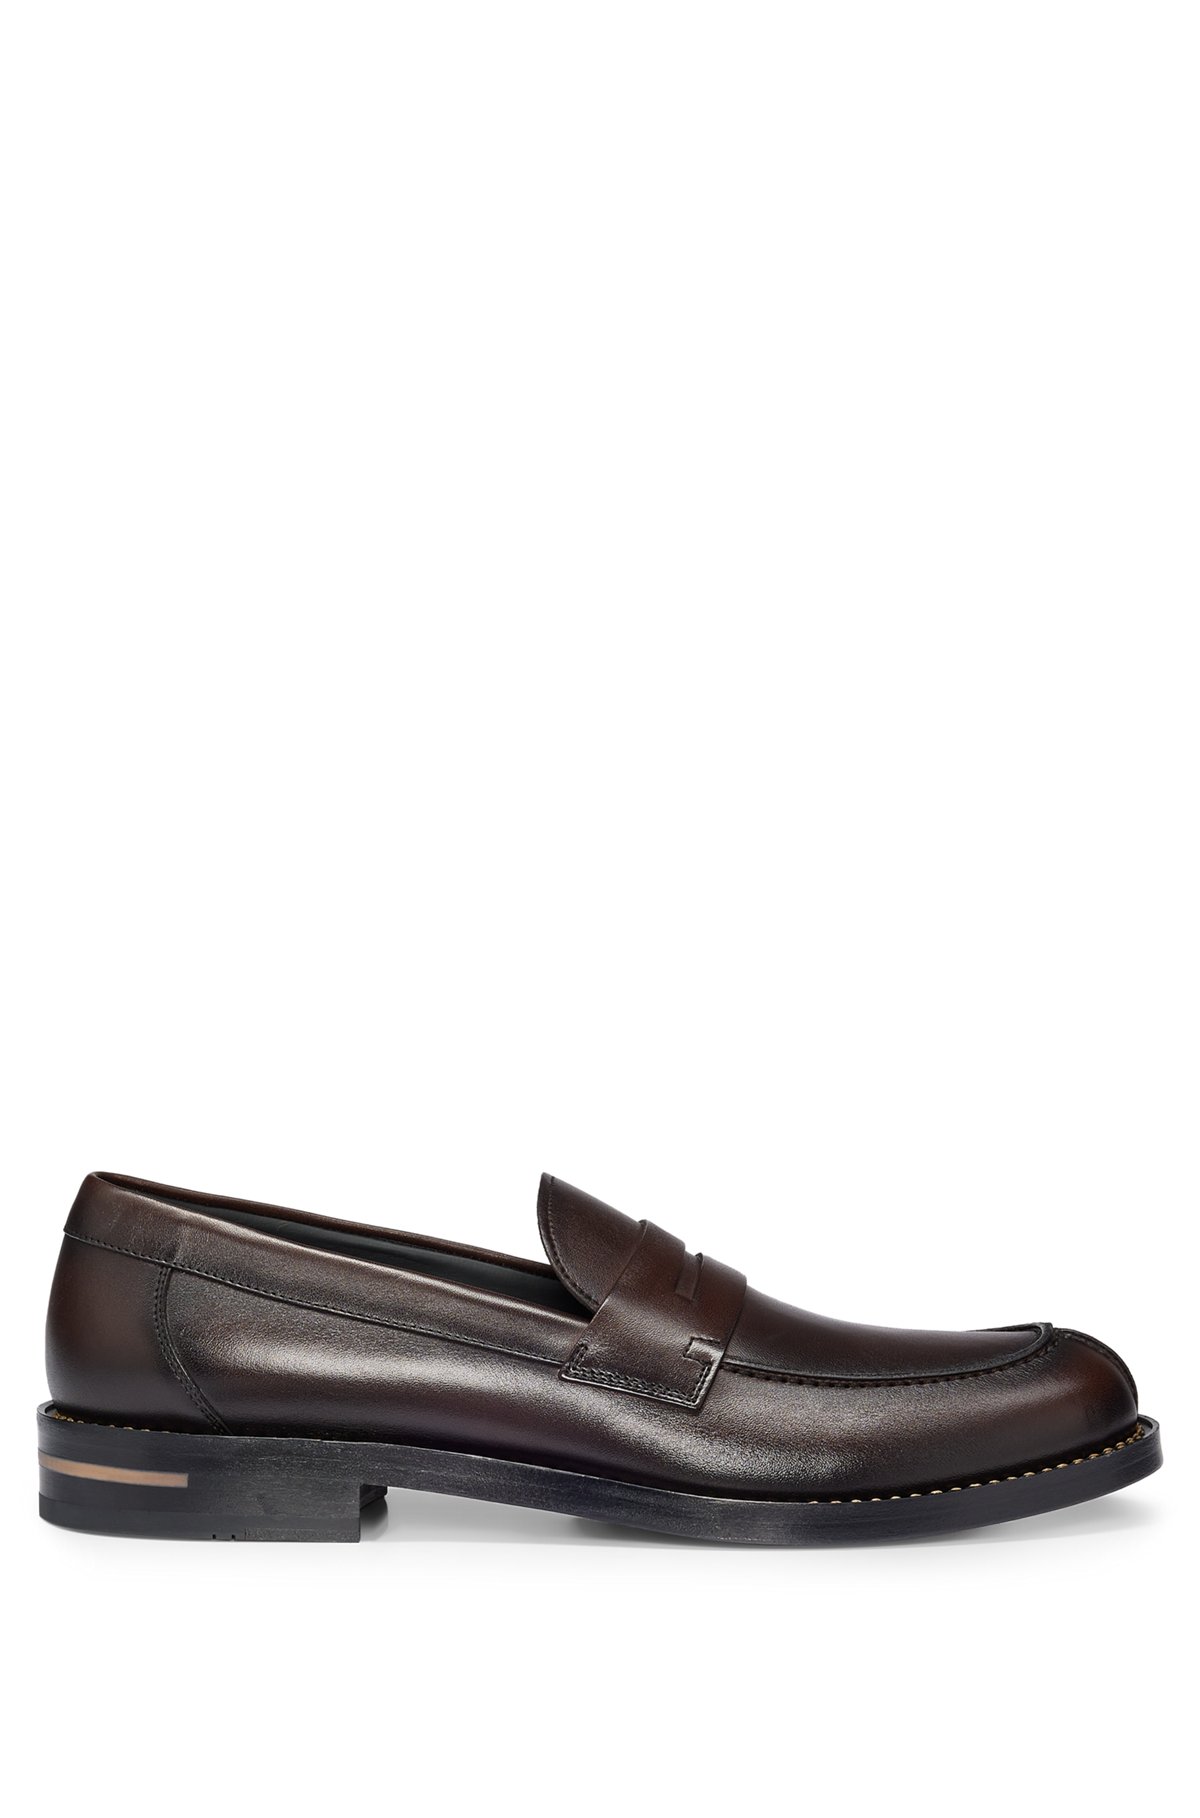 Leather slip-on loafers with penny trim, Dark Brown